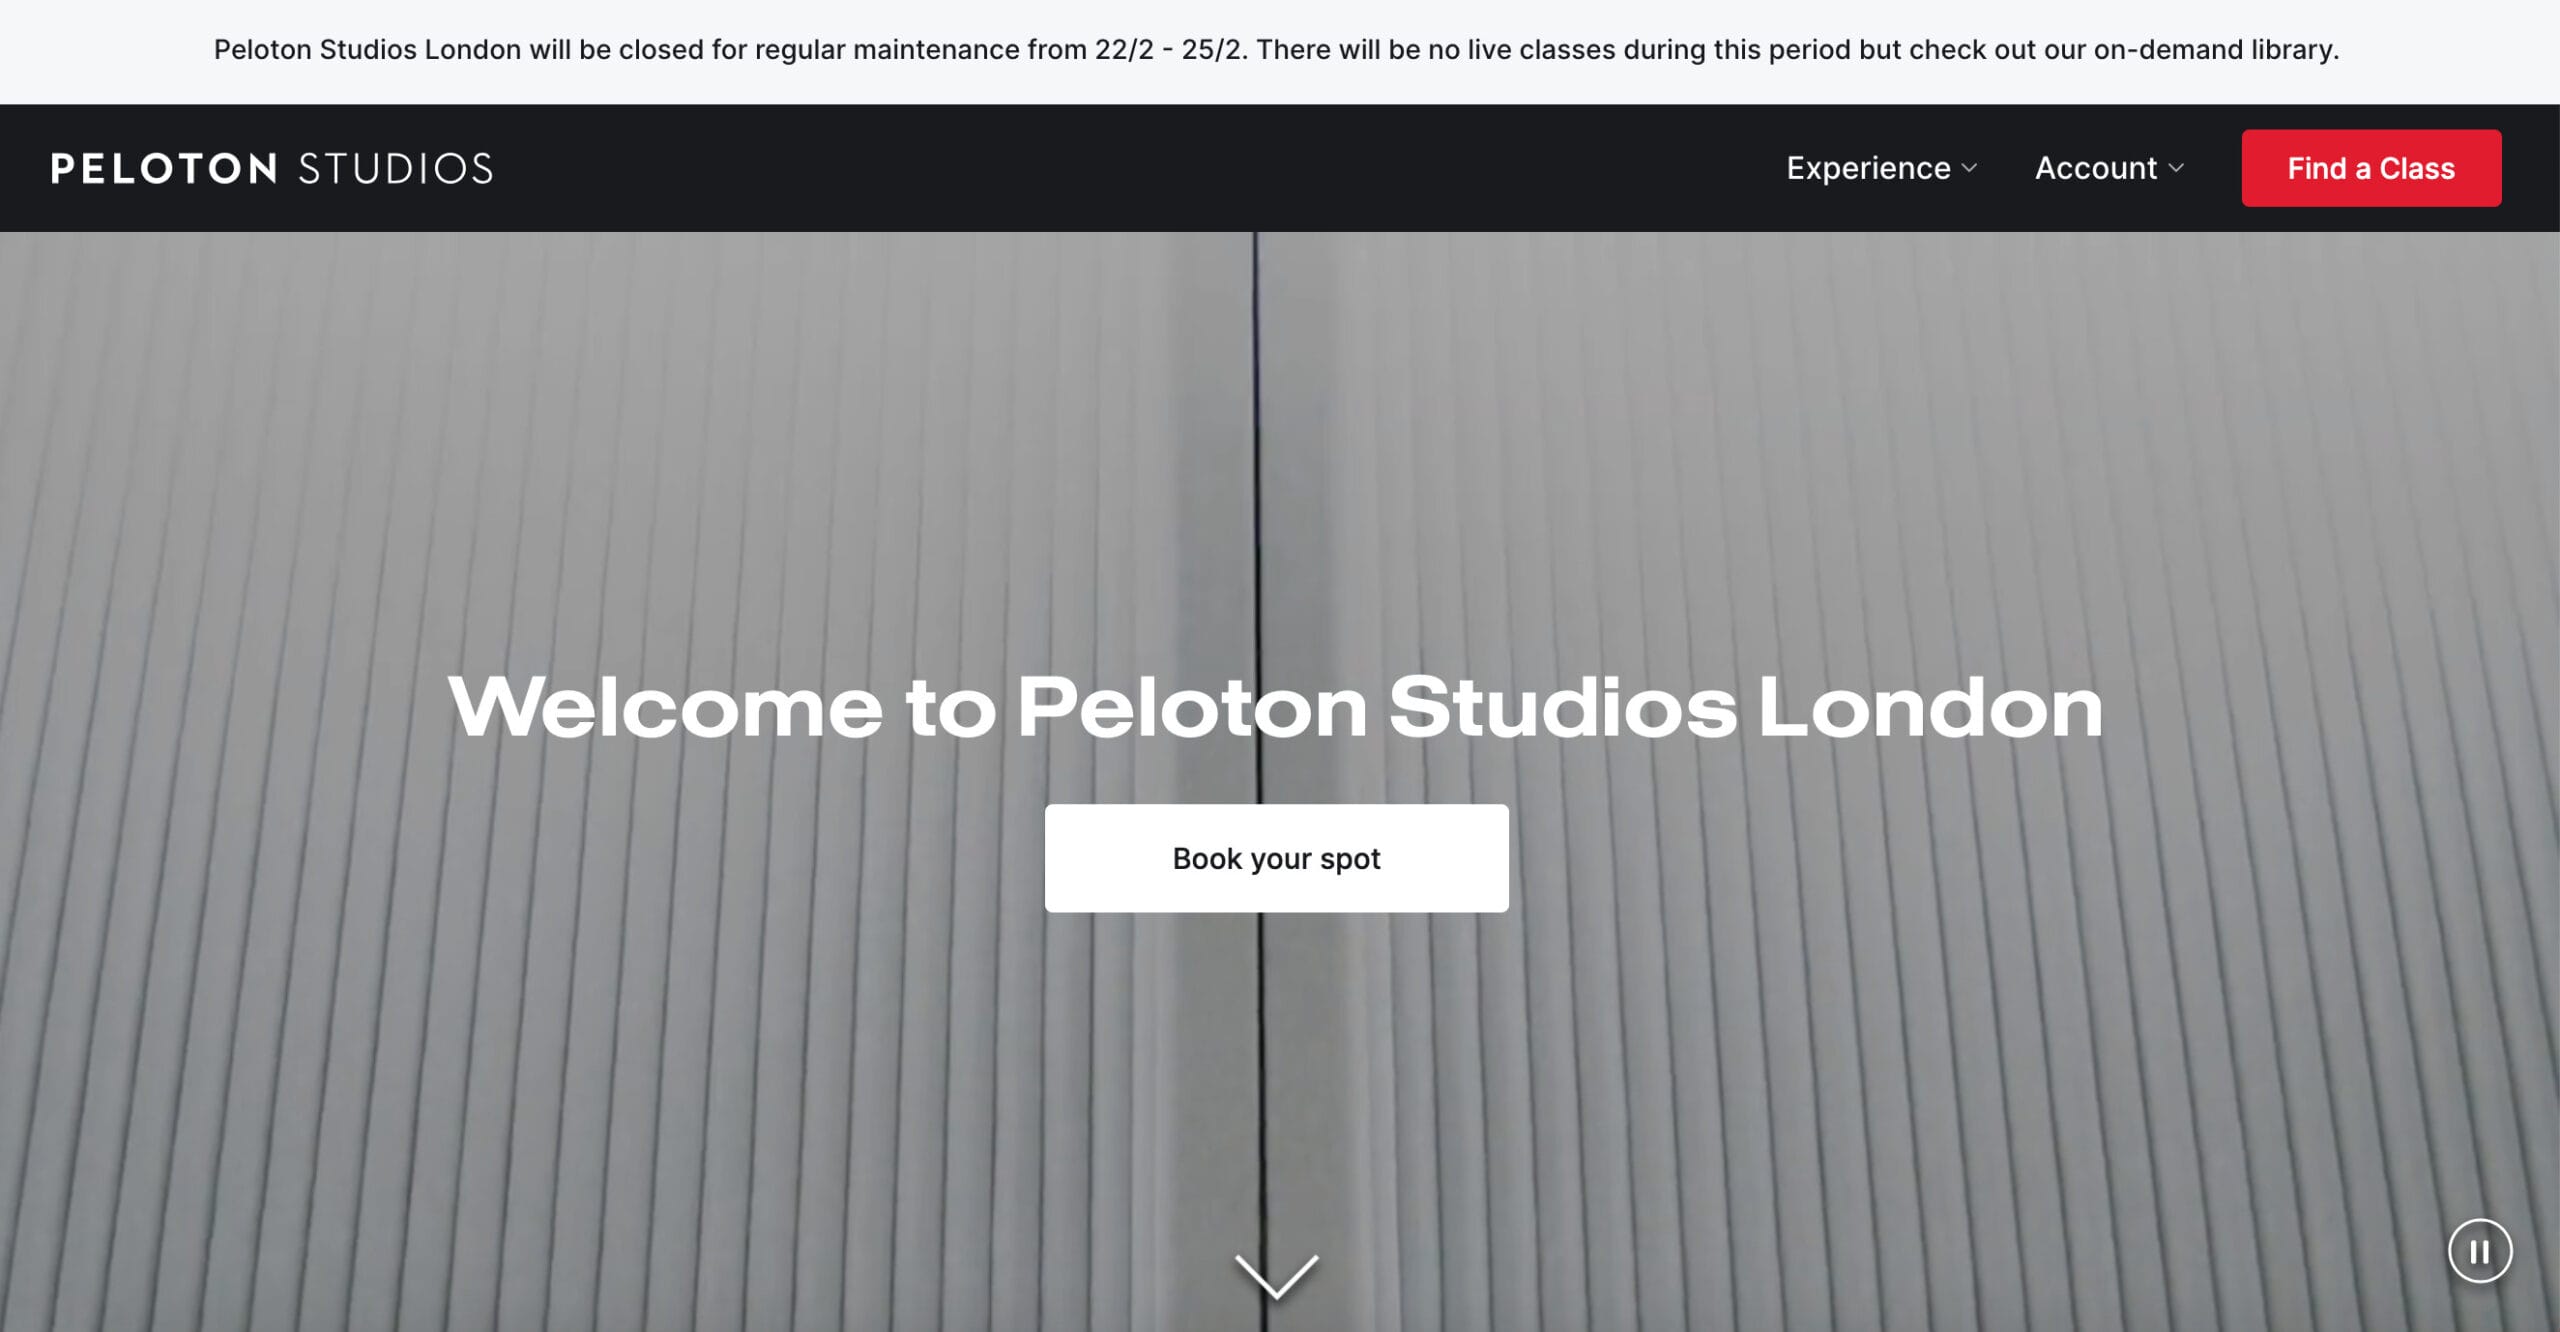 Peloton Studios London booking site with alert message about upcoming studio closure.